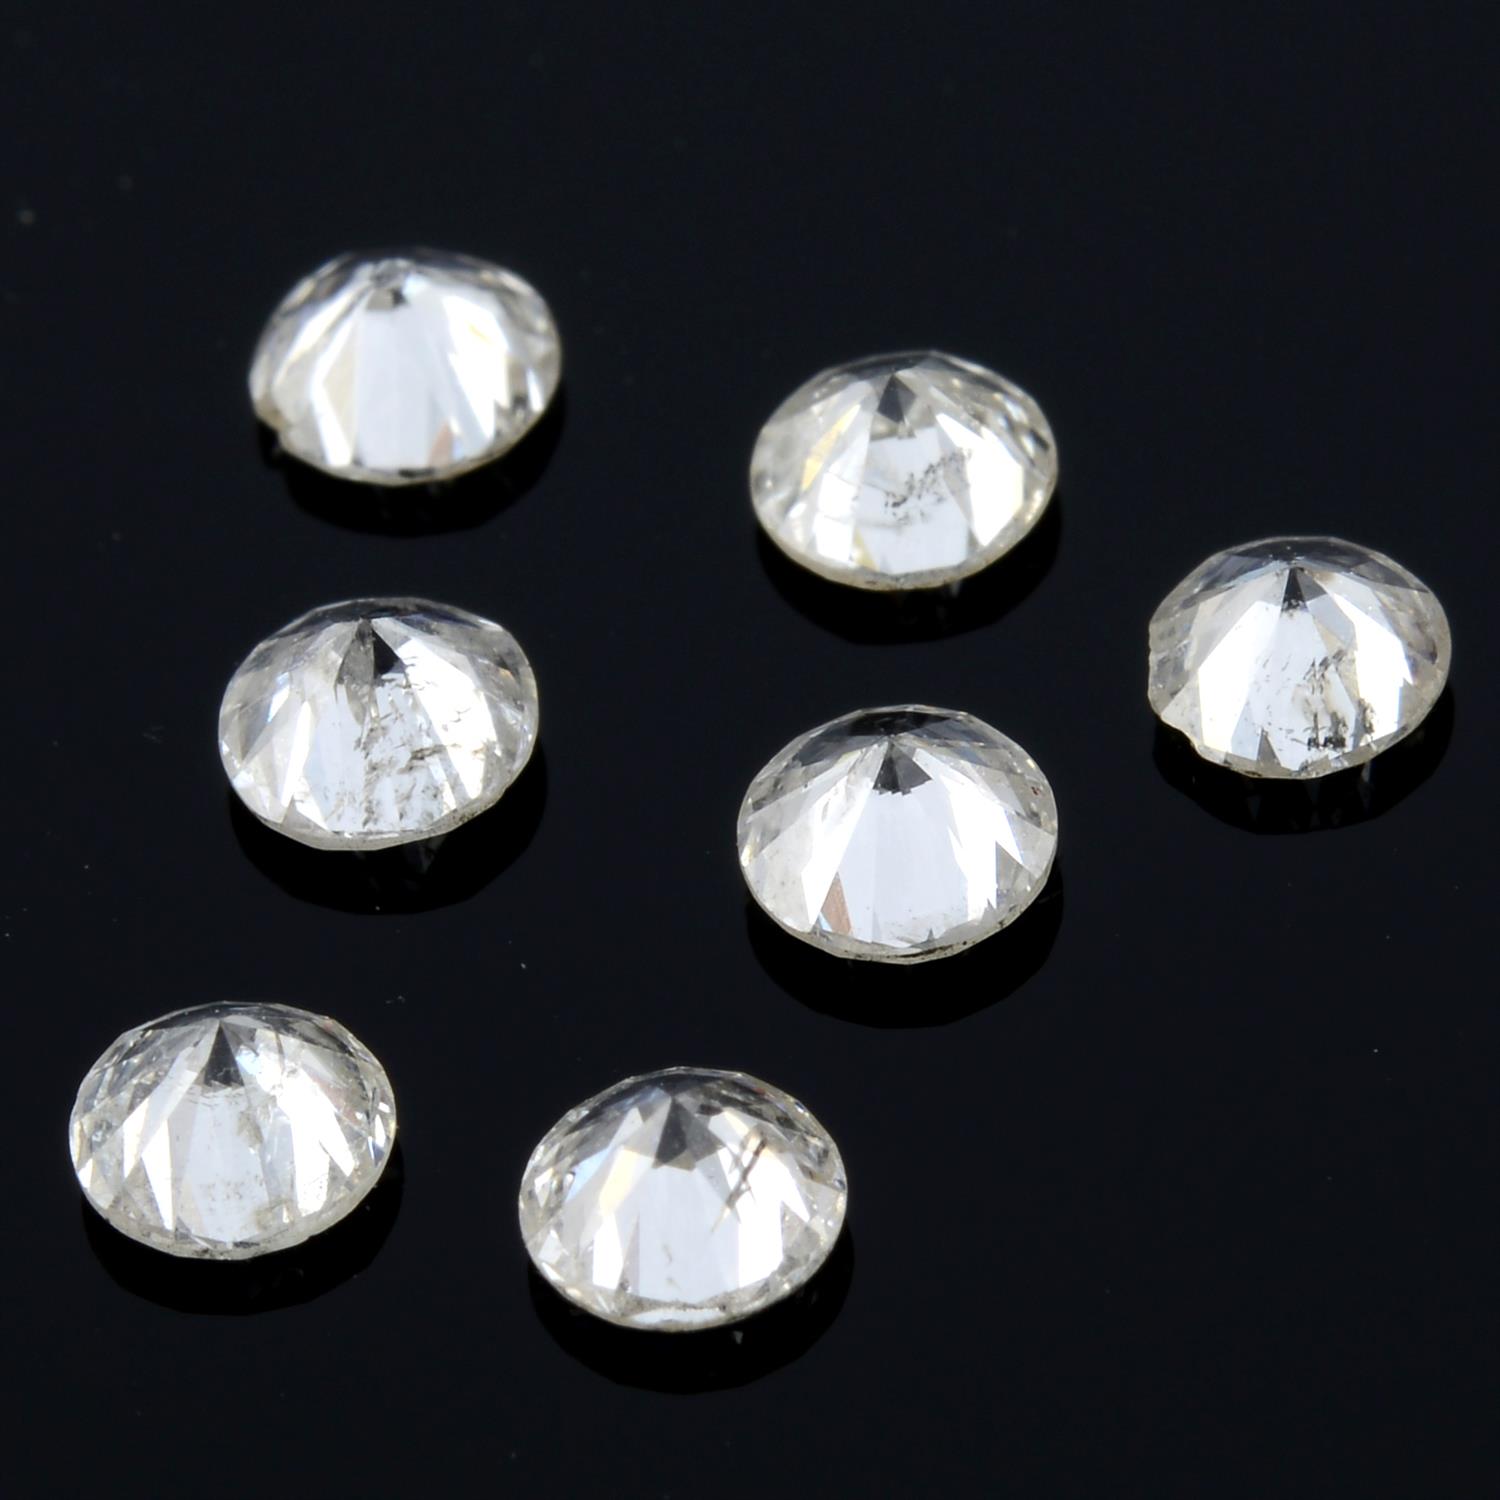 Seven brilliant cut diamonds, weighing 1.16ct - Image 2 of 2